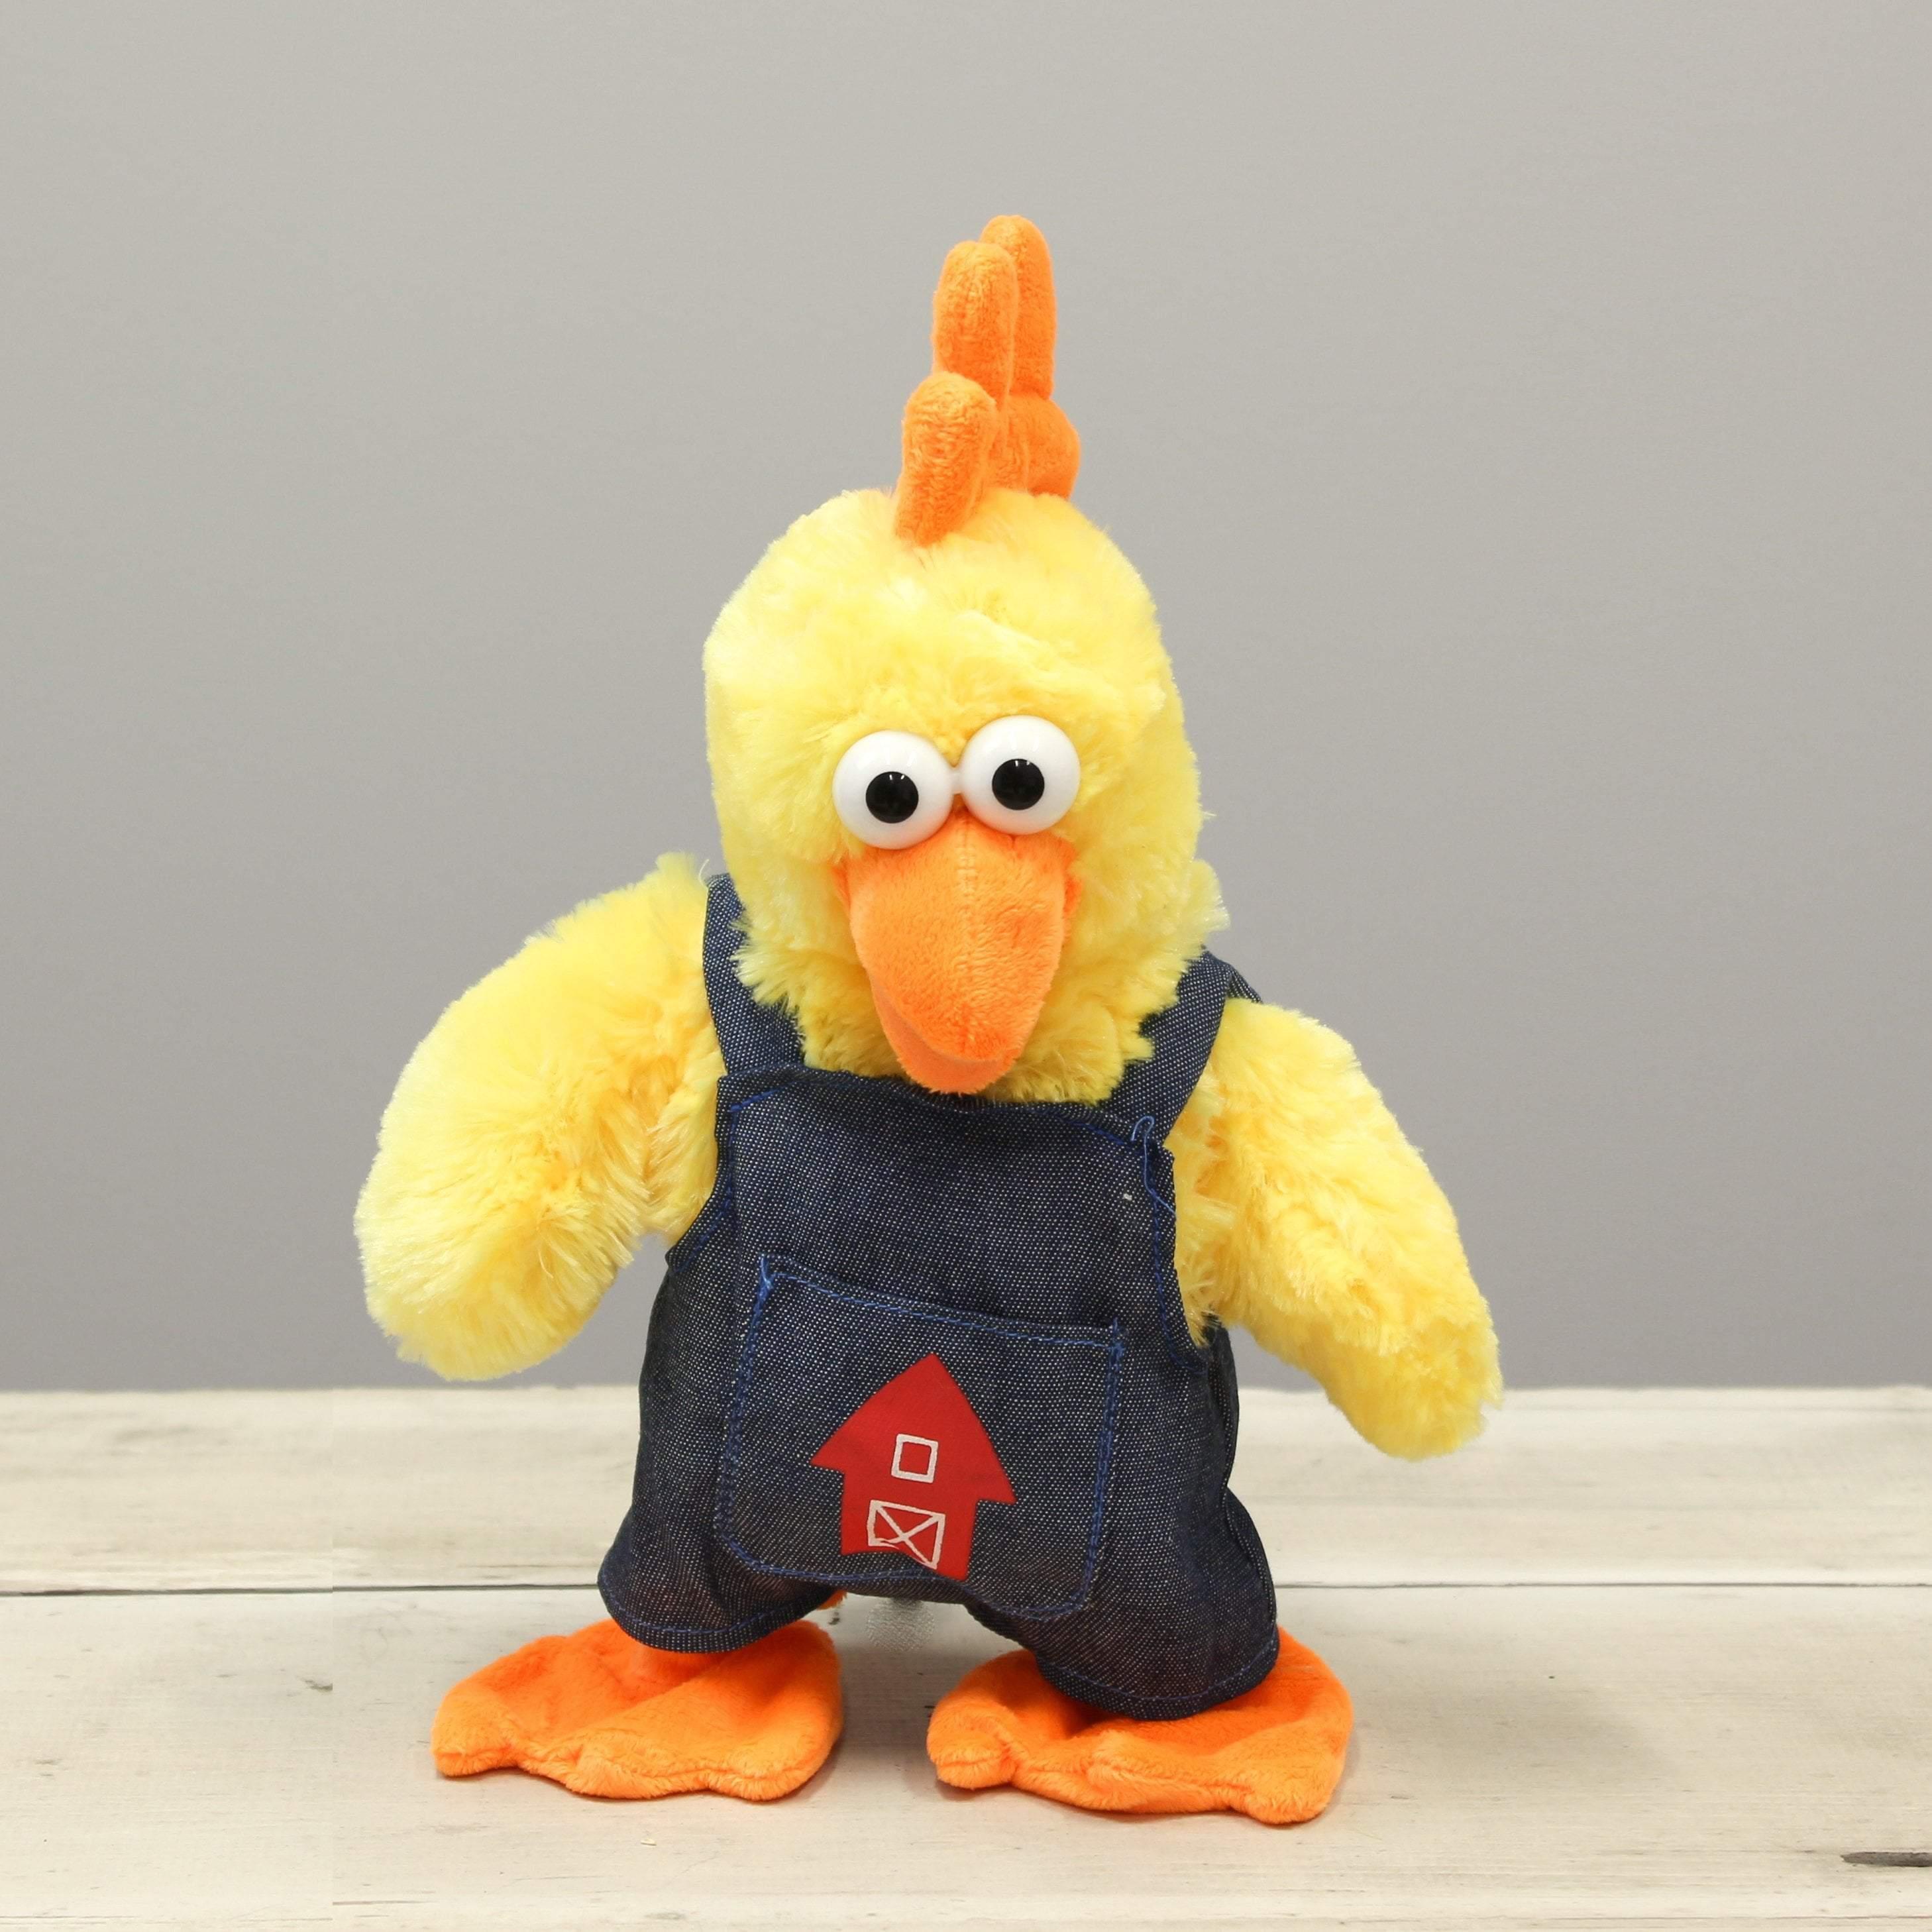 "Bucky" the 11.5in Nat and Jules Cluck Rooster Animated Plush Toy